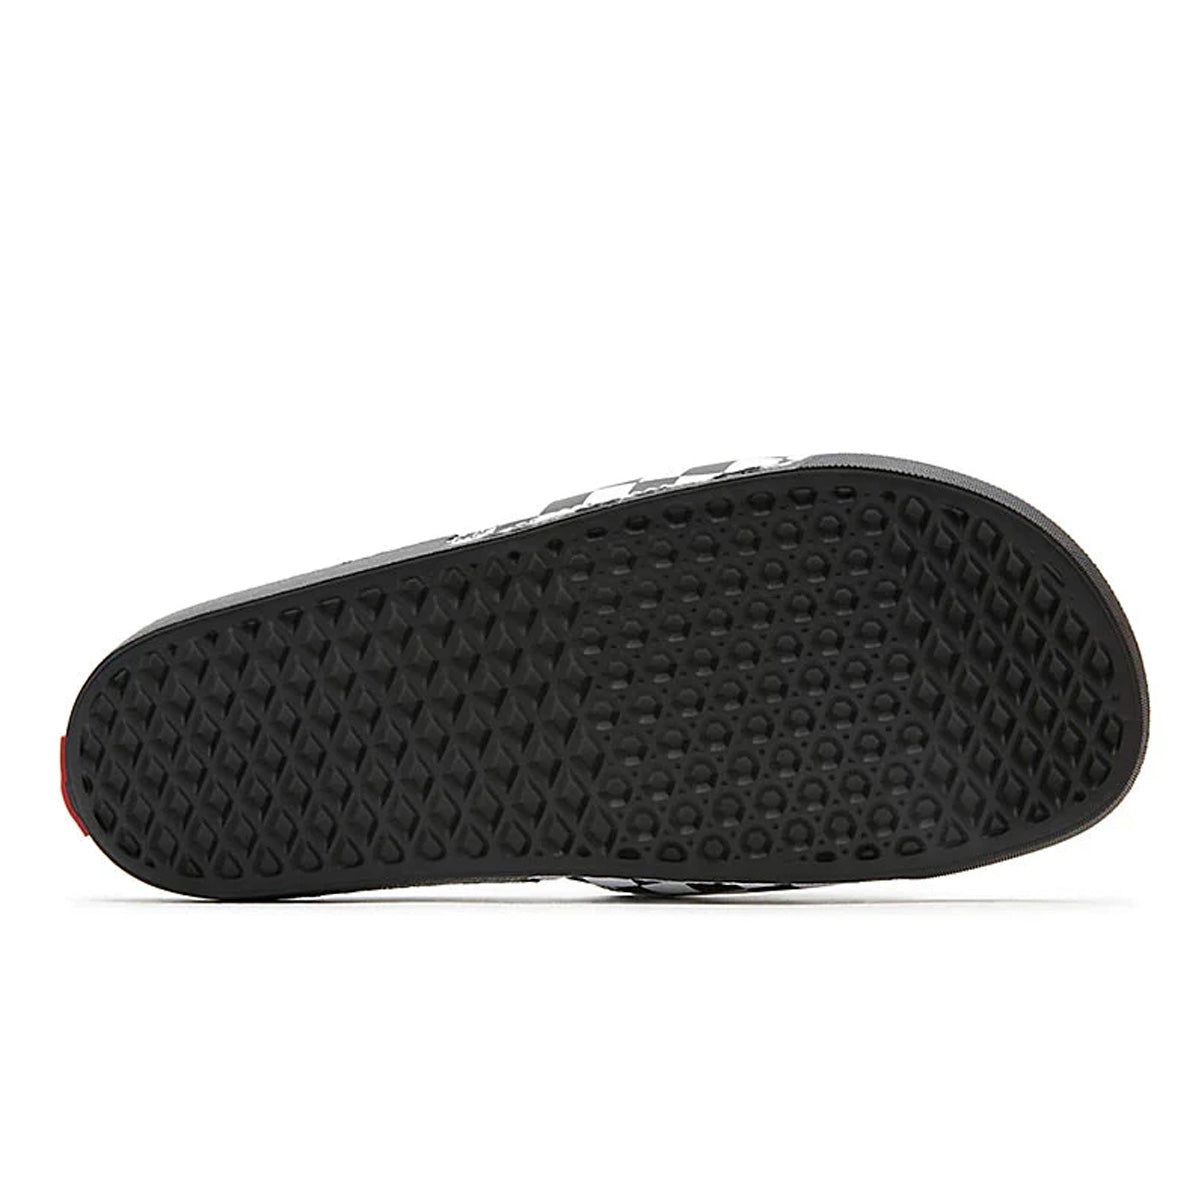 Black vans sliders with checkerboard strap. Free uk shipping over £50